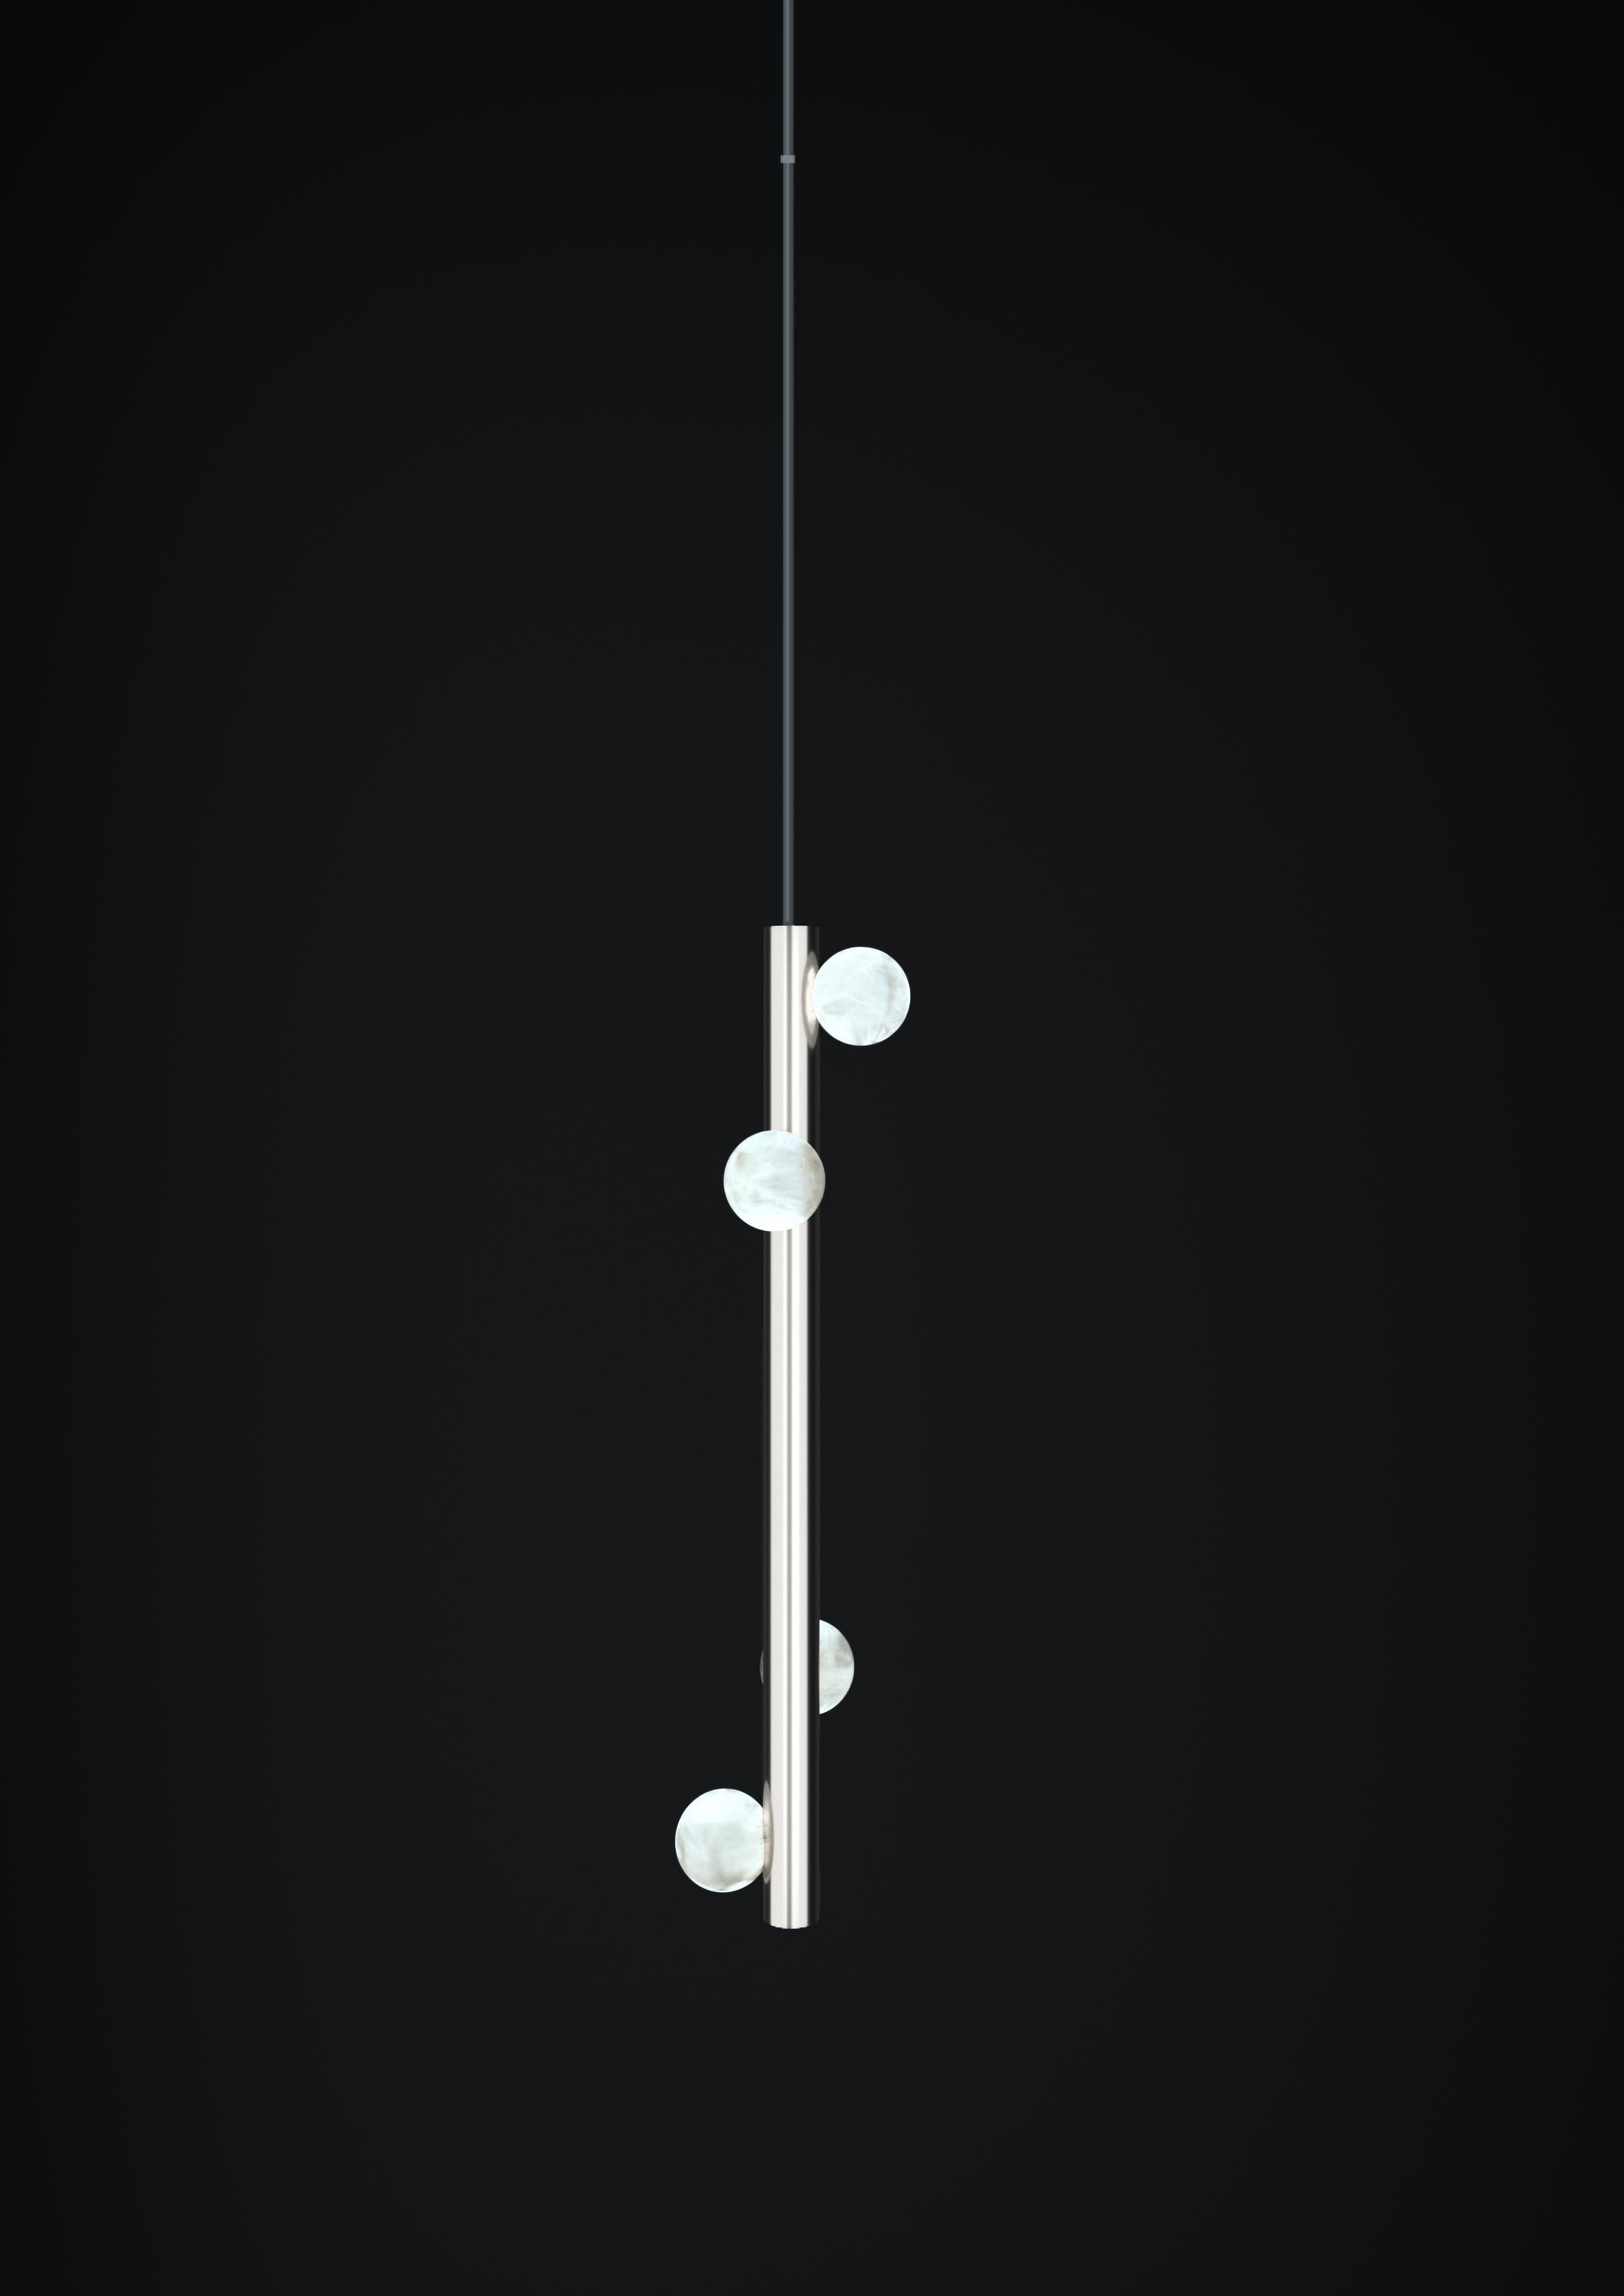 Demetra Shiny Silver Metal Pendant Lamp 2 by Alabastro Italiano
Dimensions: D 12 x W 12 x H 60 cm.
Materials: White alabaster and metal.

Available in different finishes: Shiny Silver, Bronze, Brushed Brass, Ruggine of Florence, Brushed Burnished,